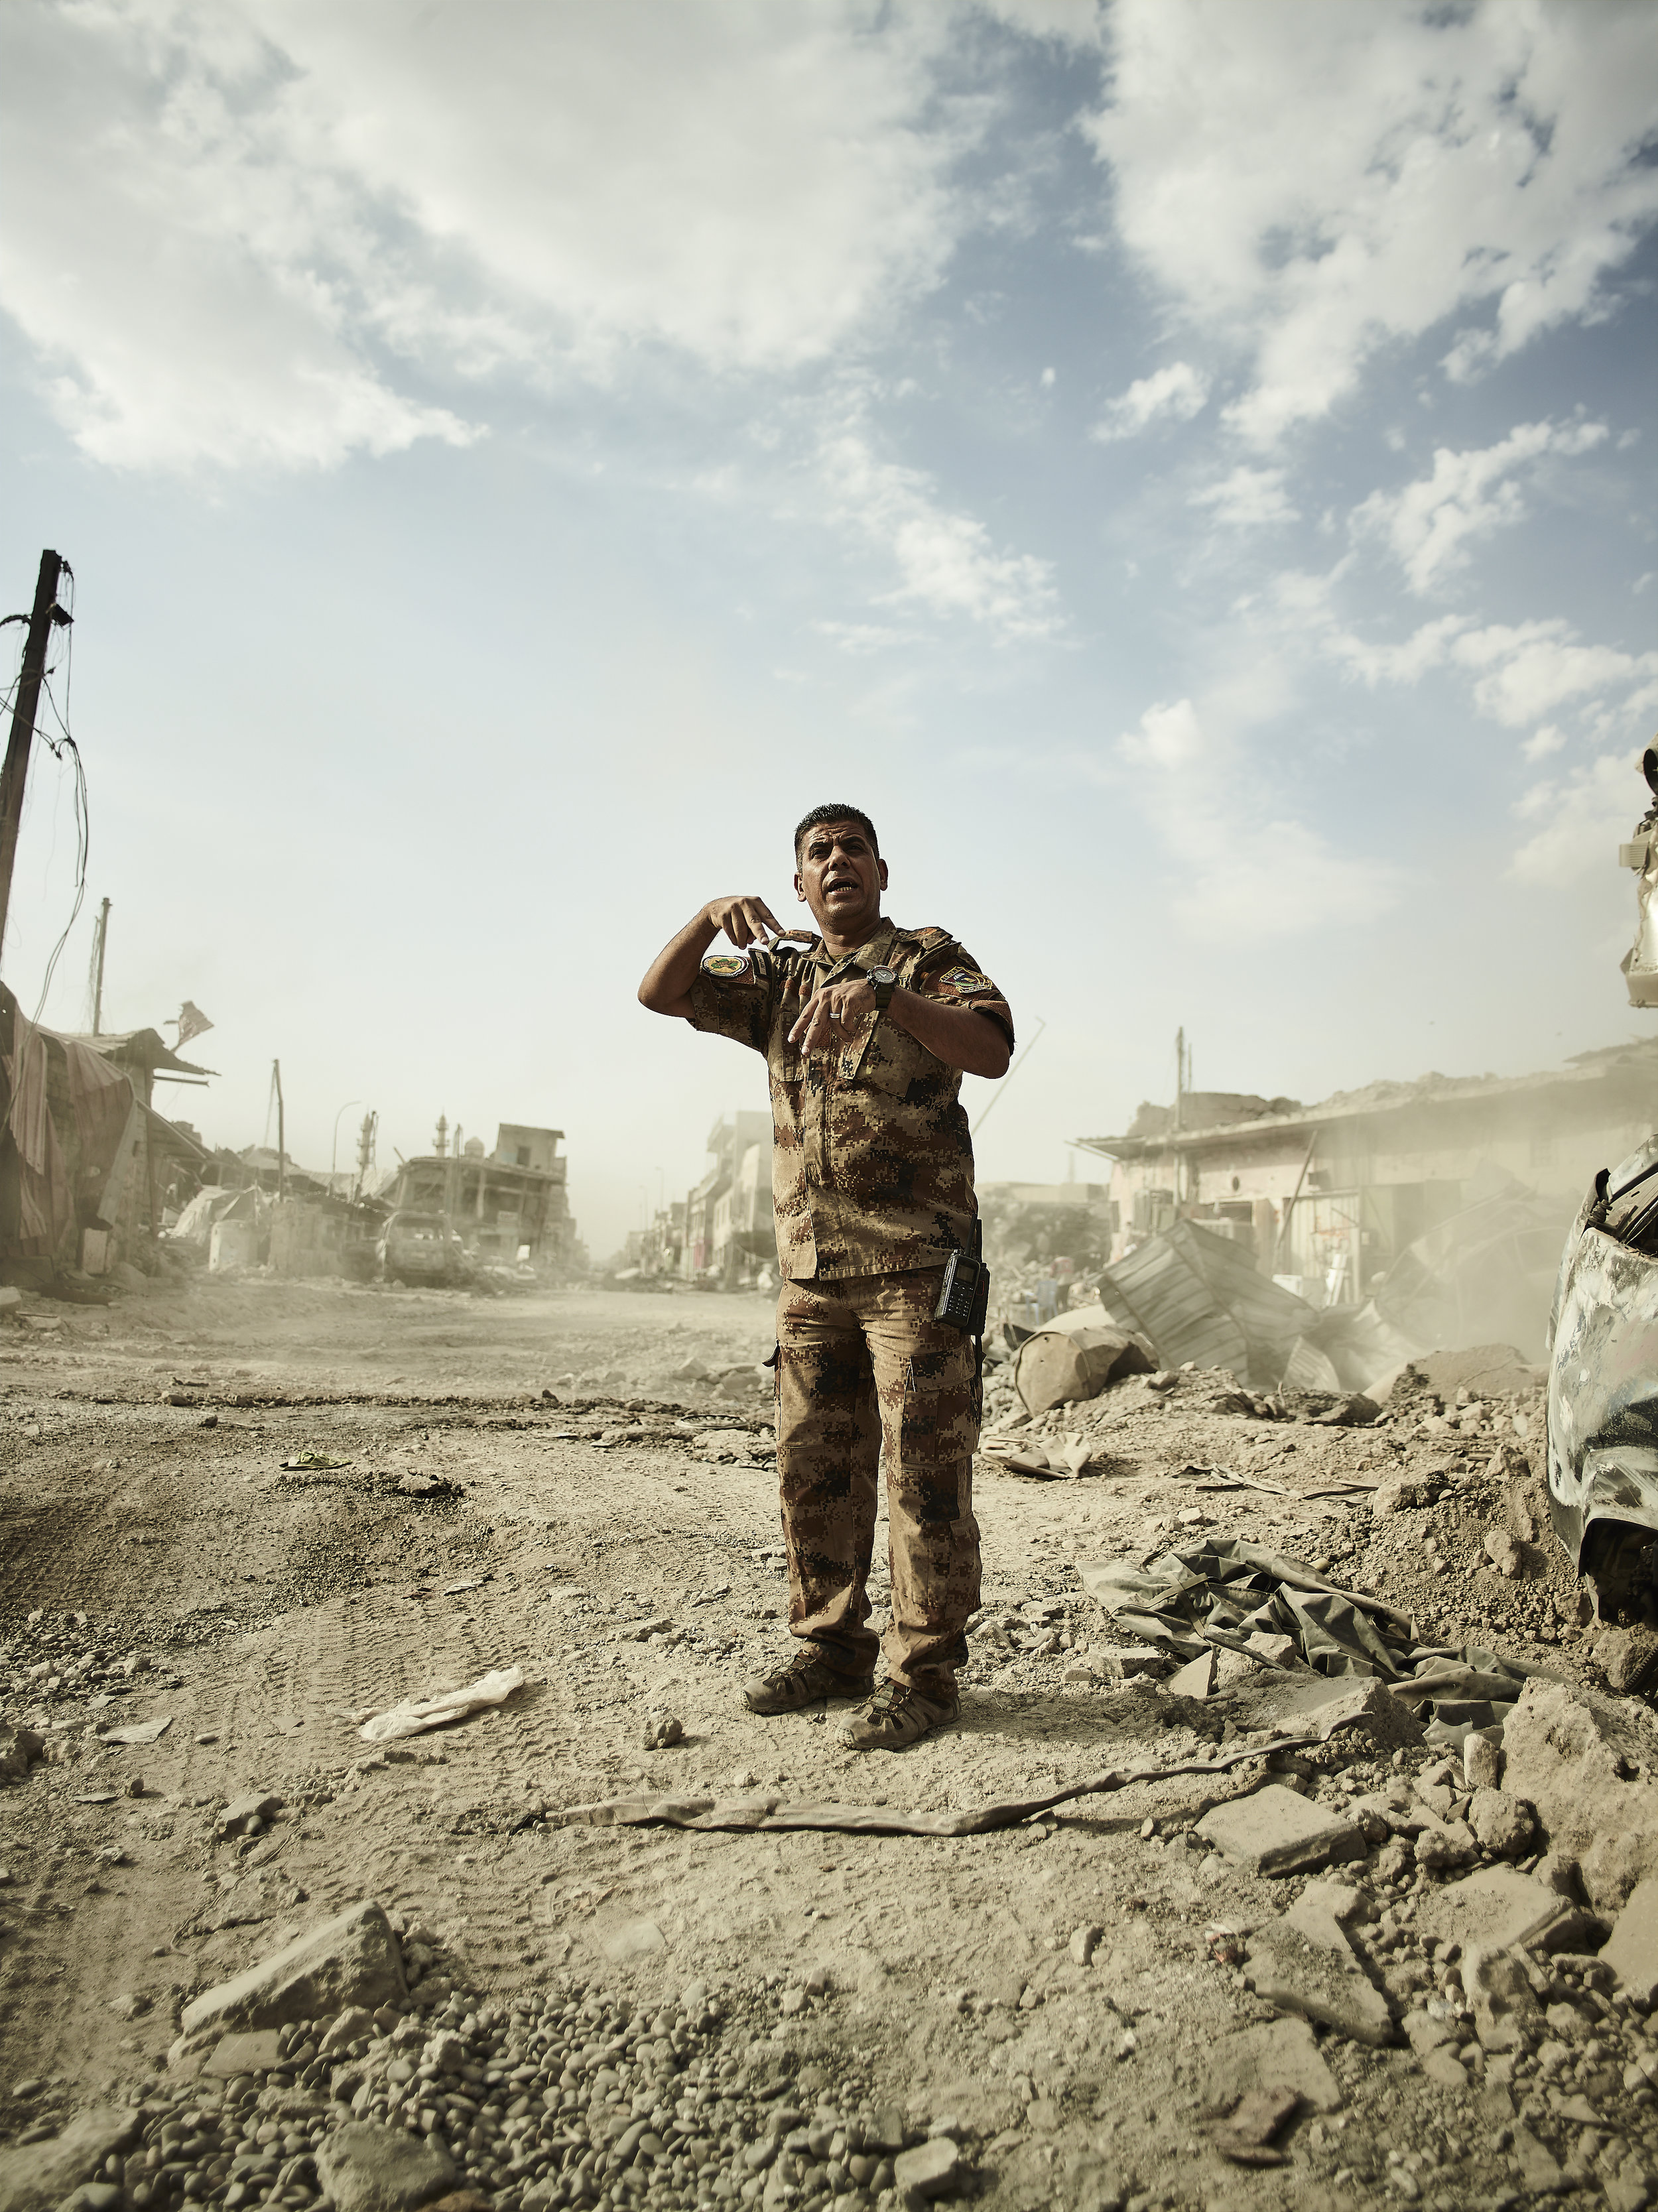 An Iraqi army major ordering the removal of rubble, West Mosul